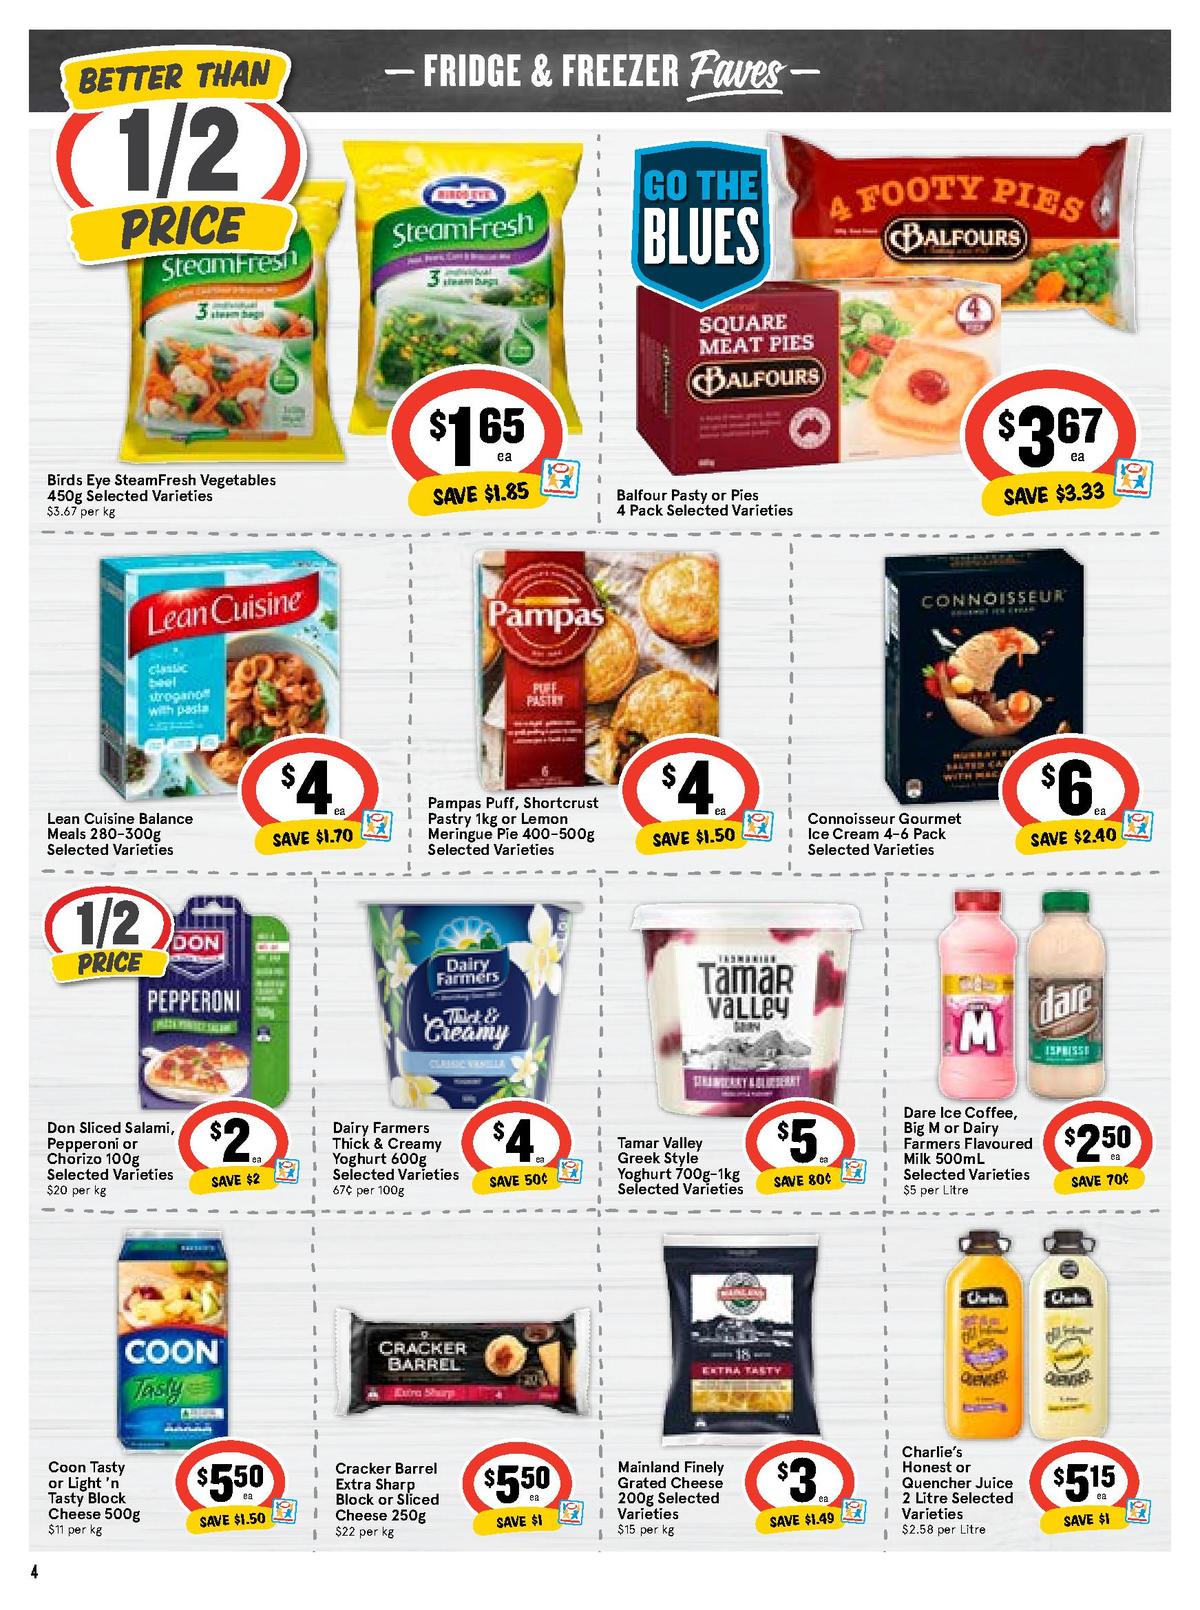 IGA Catalogues from 19 June